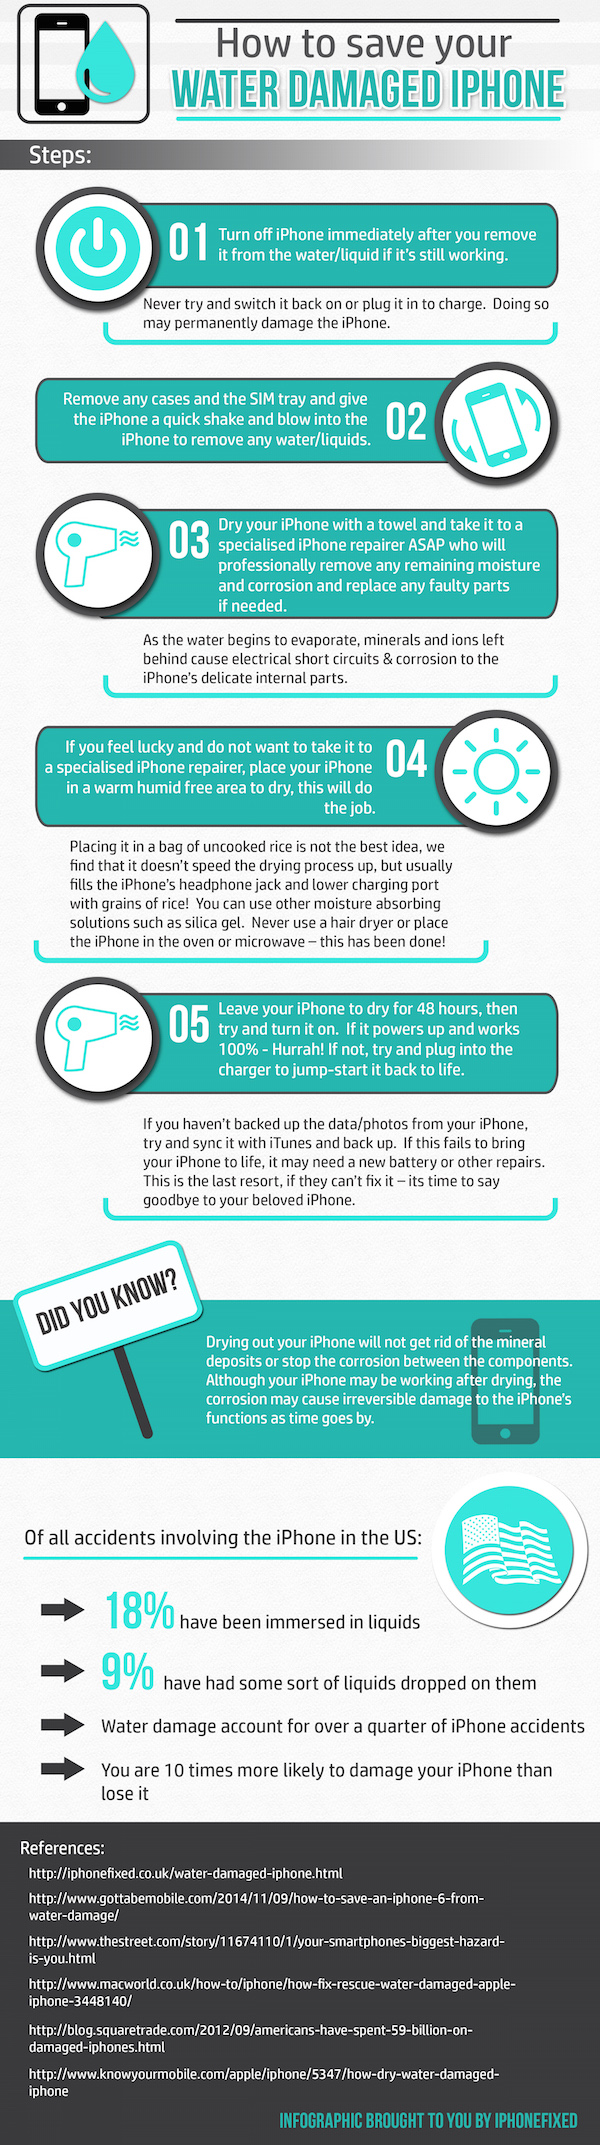 How to save your water damaged iPhone - Infographics